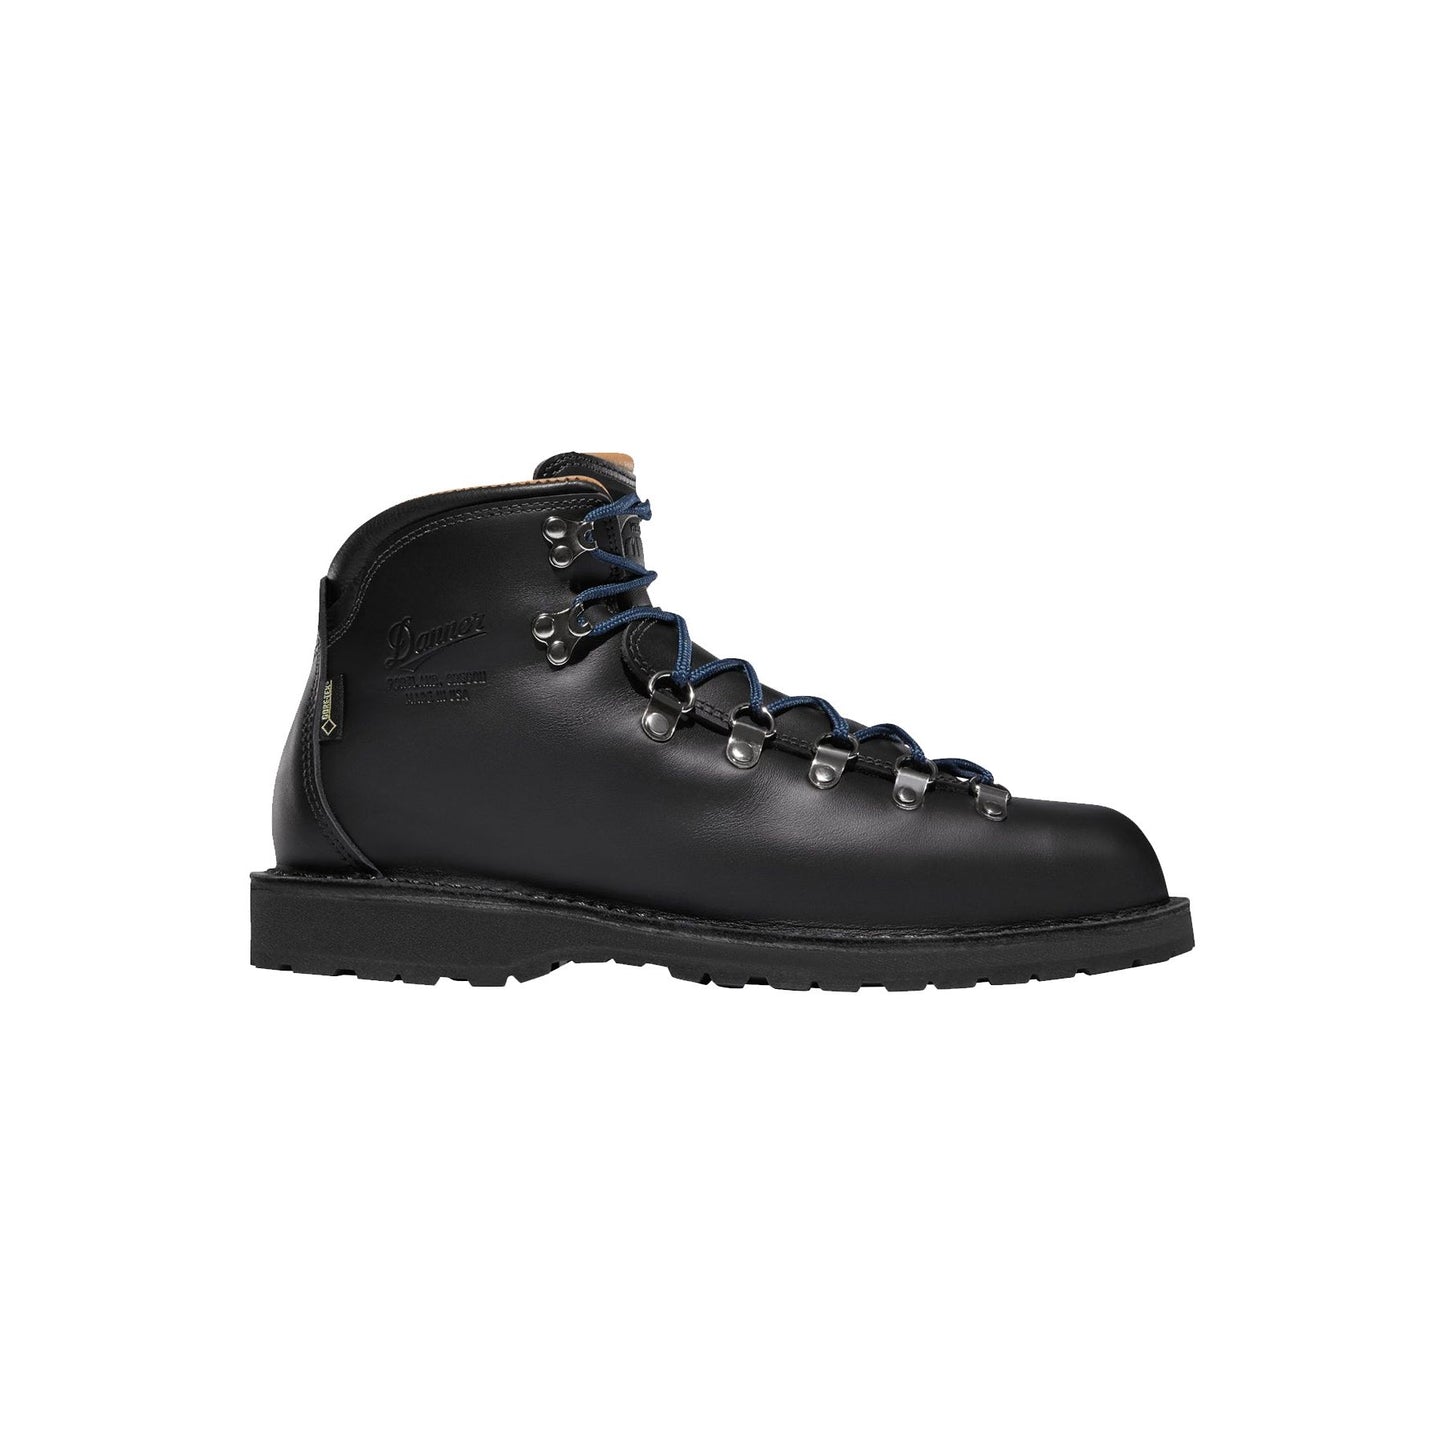 Danner W Hiking Boots W Mountain Pass The Alpine, Black